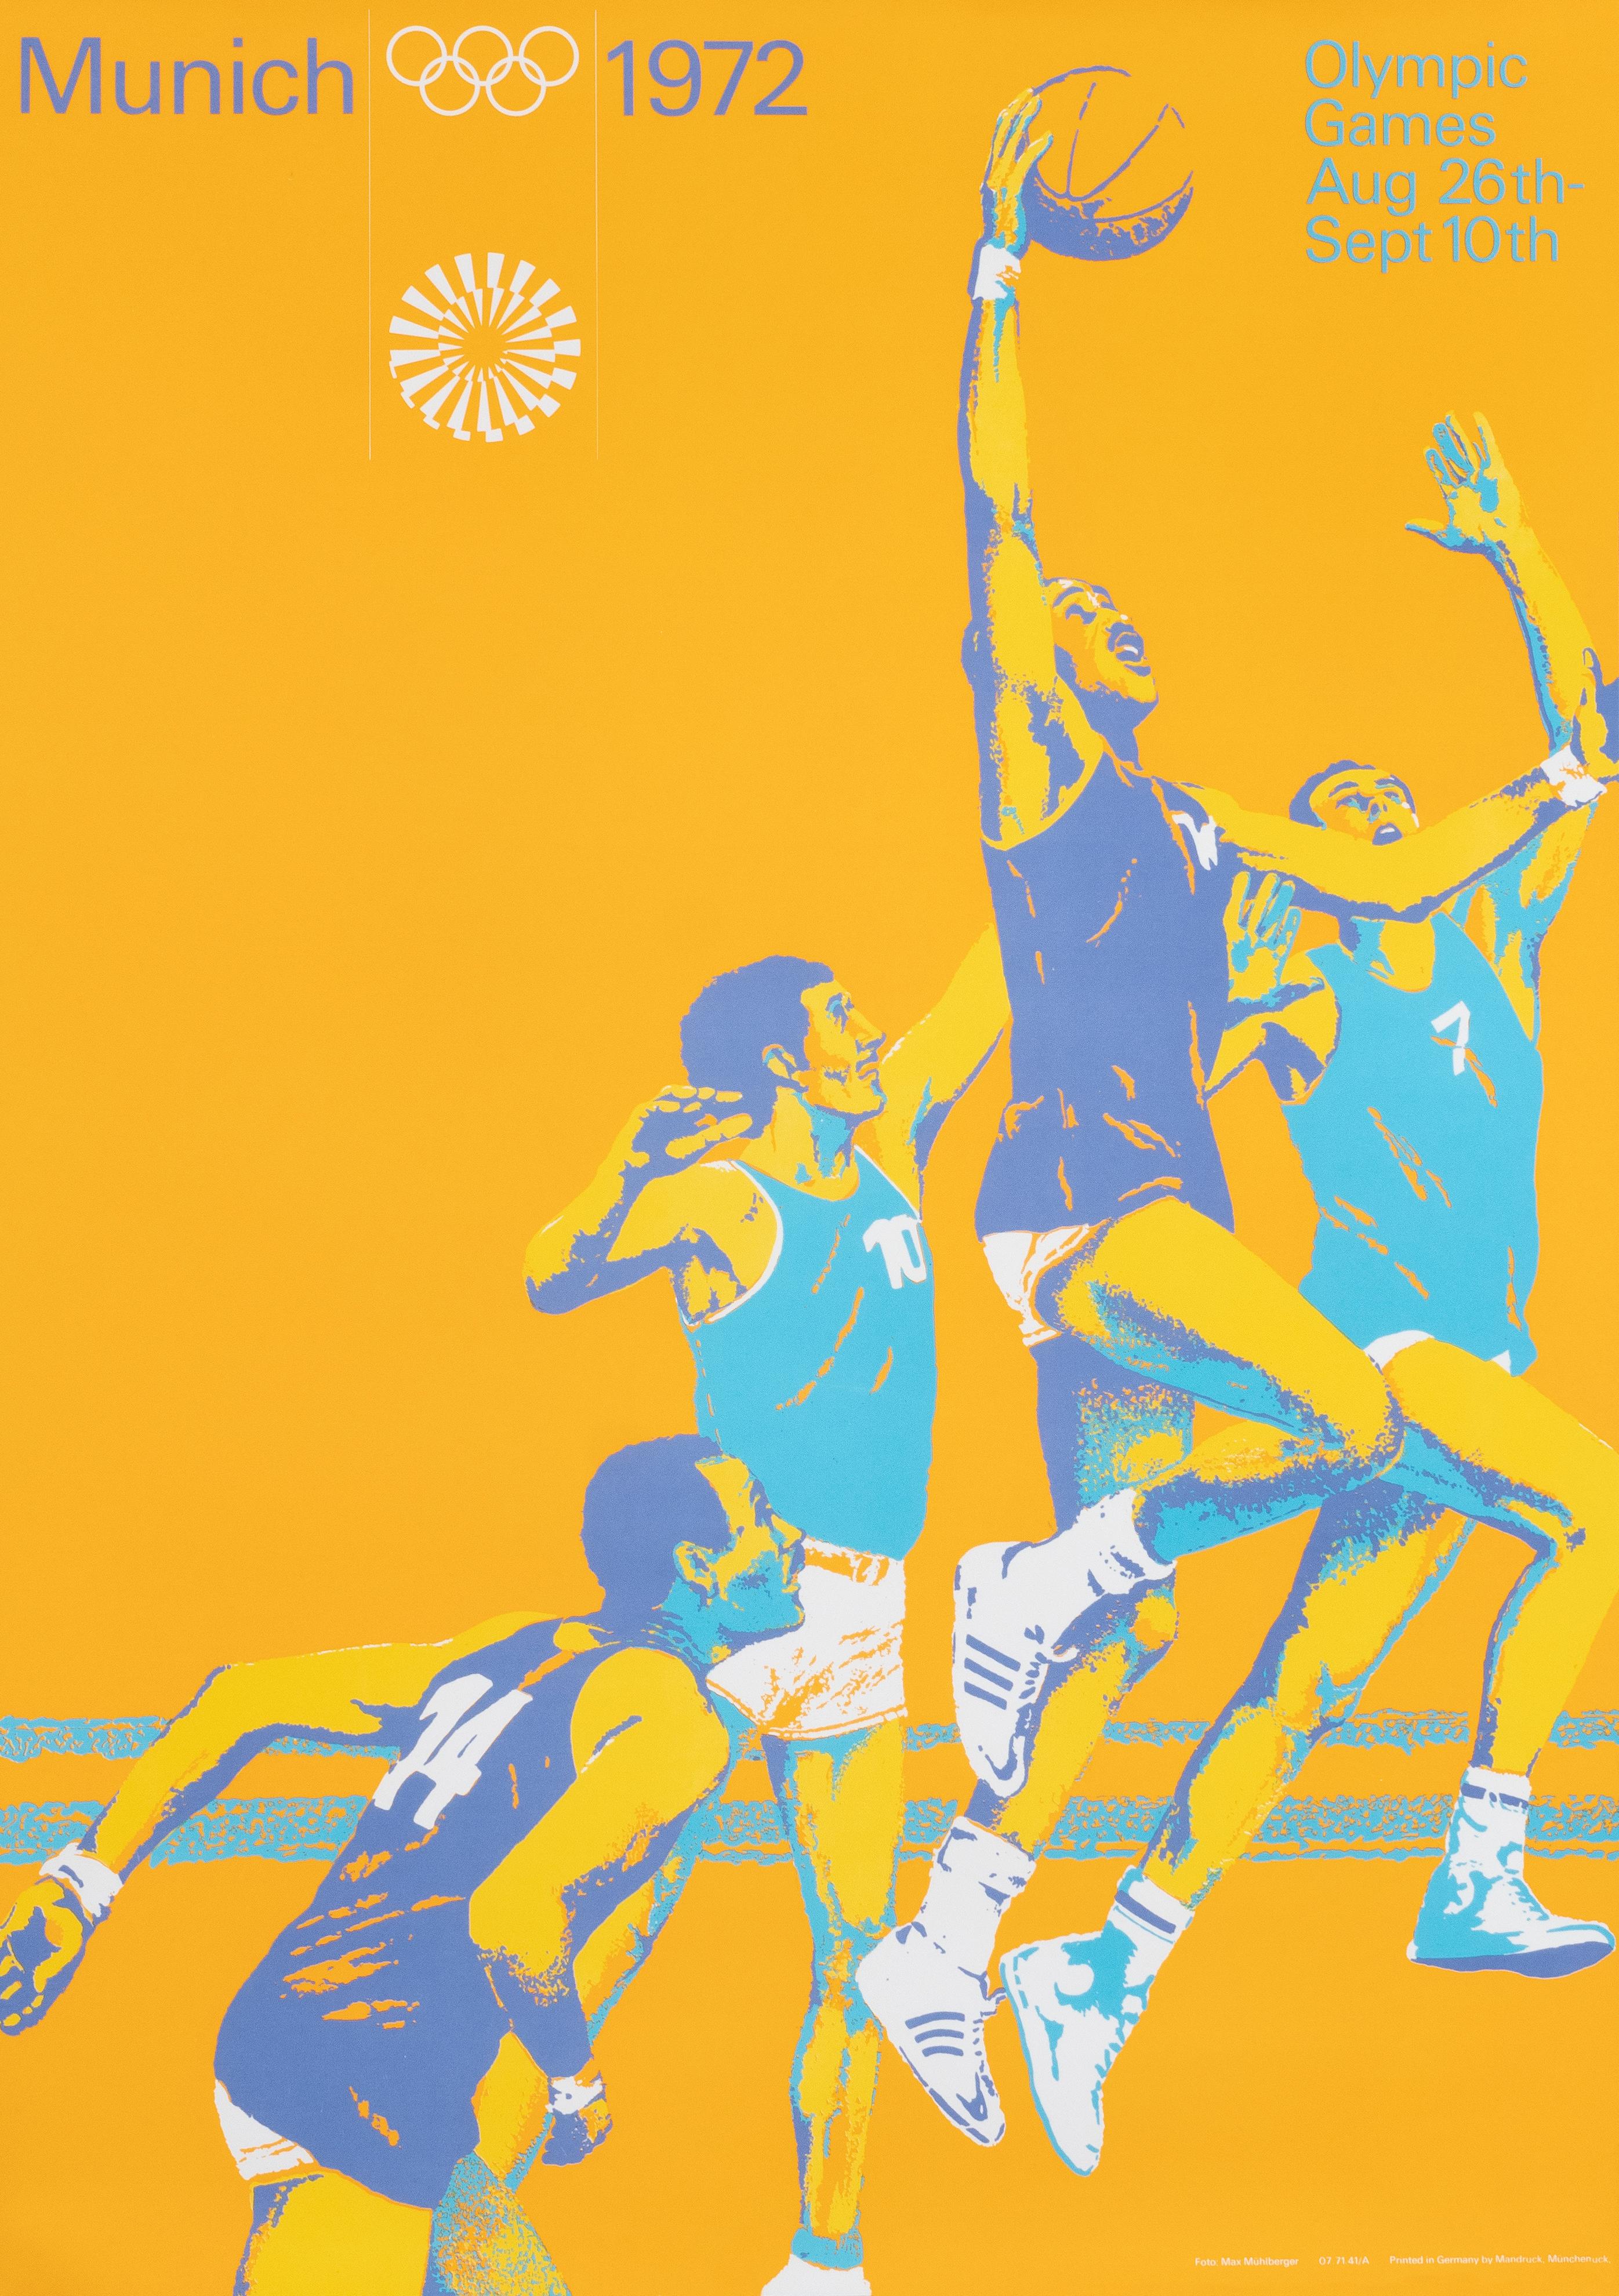 "Olympic Games 1972 - Basketball (small)" Munich Sports Original Vintage Poster - Print by Otl Aicher